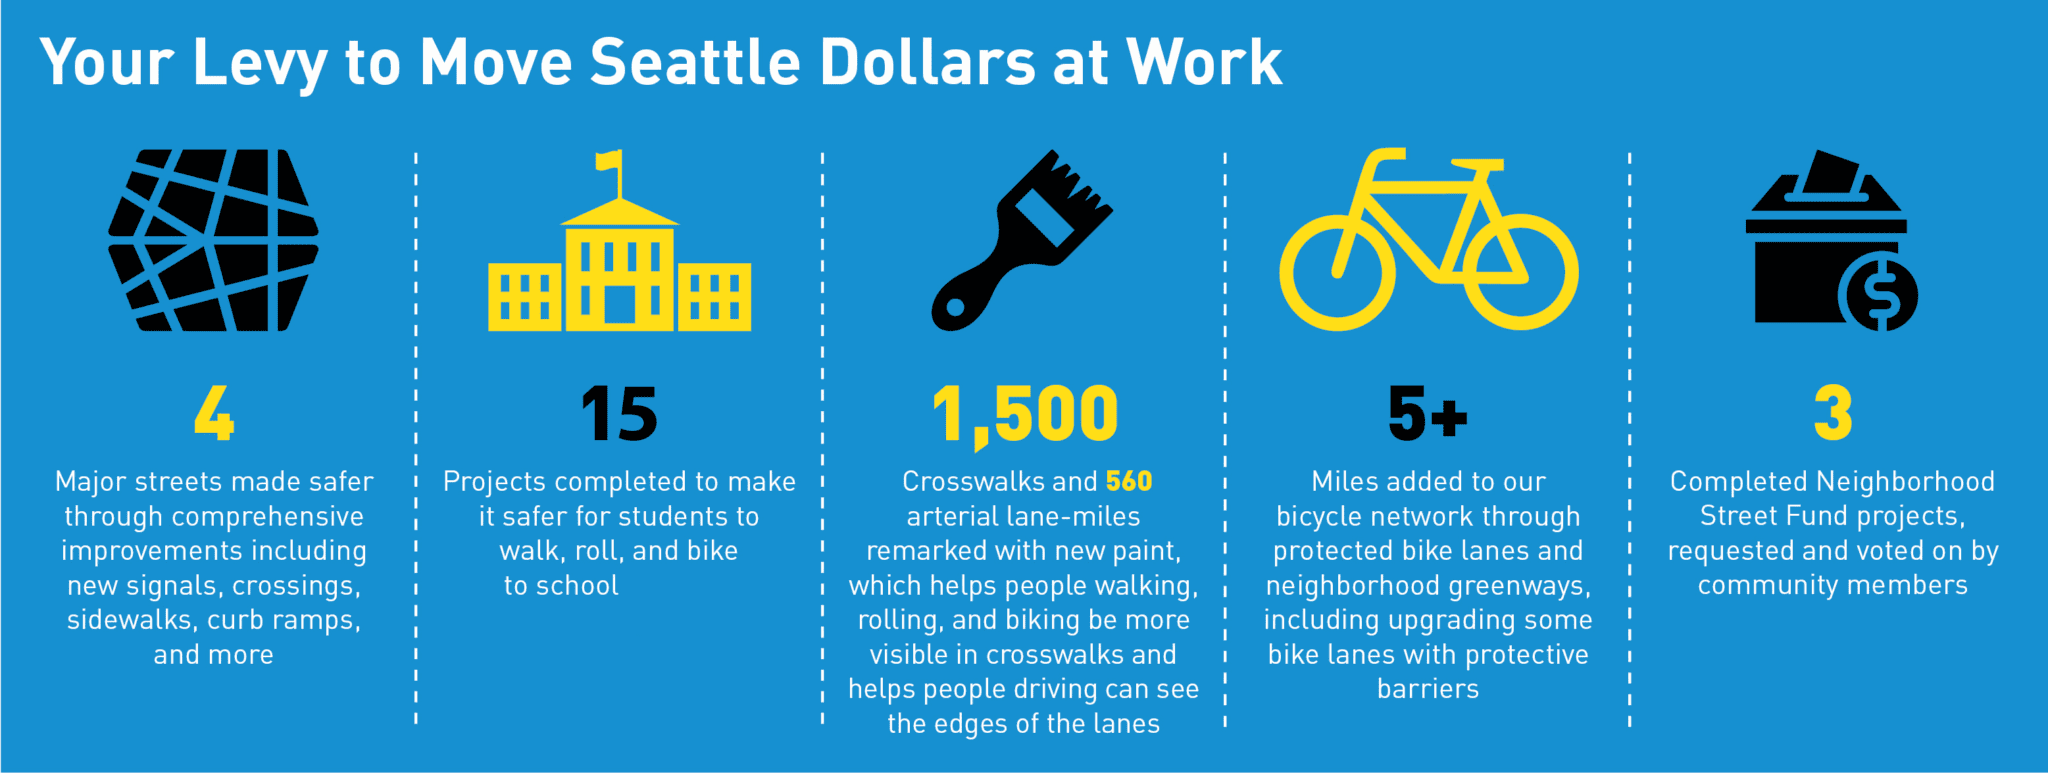 Infographic highlighting Levy to Move Seattle dollars at work, including 4 major streets made safer through comprehensive improvements including new signals, crossings, sidewalks, curb ramps, and more; 15 projects completed to make it safer for students to walk, roll, and bike to school; 1,500 crosswalks and 560 arterial lane-miles remarked with new paint; 5+ miles added to our bicycle network; 3 completed Neighborhood Street Fund projects.